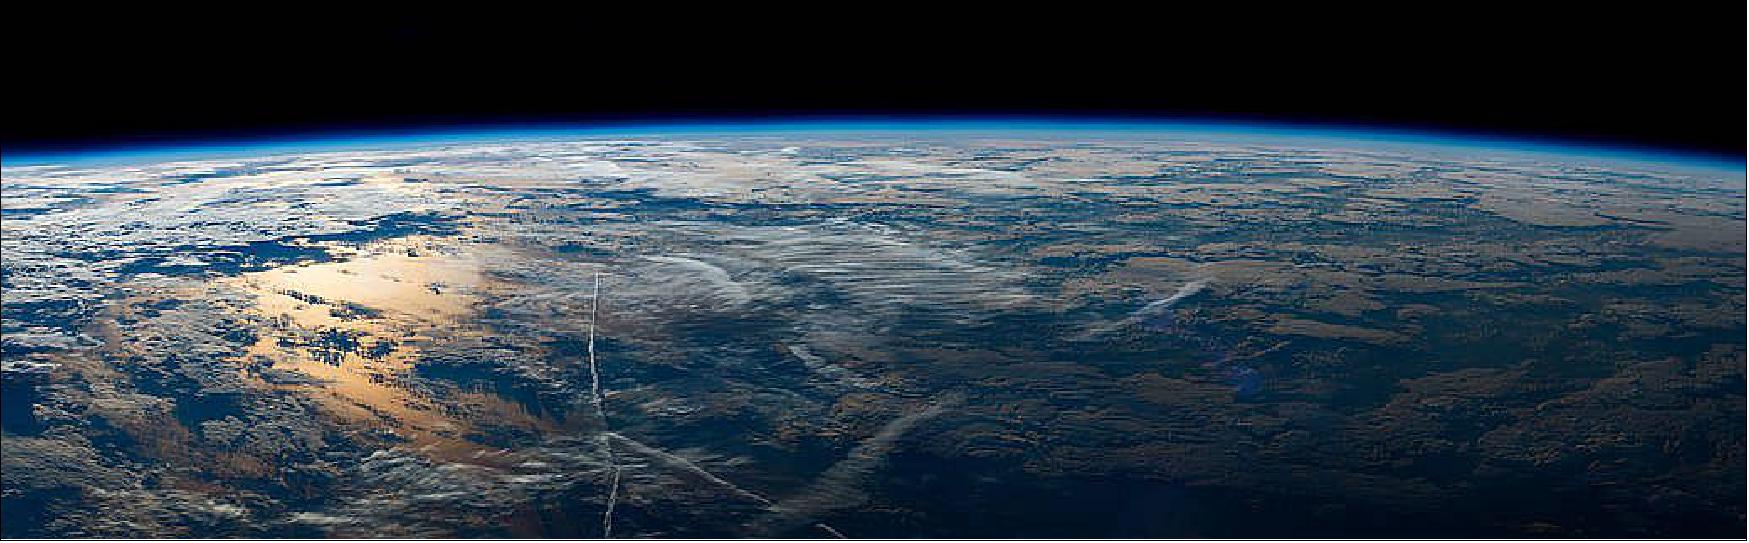 Figure 13: Expedition 48 Commander Jeff Williams of NASA shared this sunrise panorama taken from his vantage point aboard the International Space Station, writing, "Morning over the Atlantic ... this one will hang on my wall."This image was published in August 2017 (image credit: NASA)